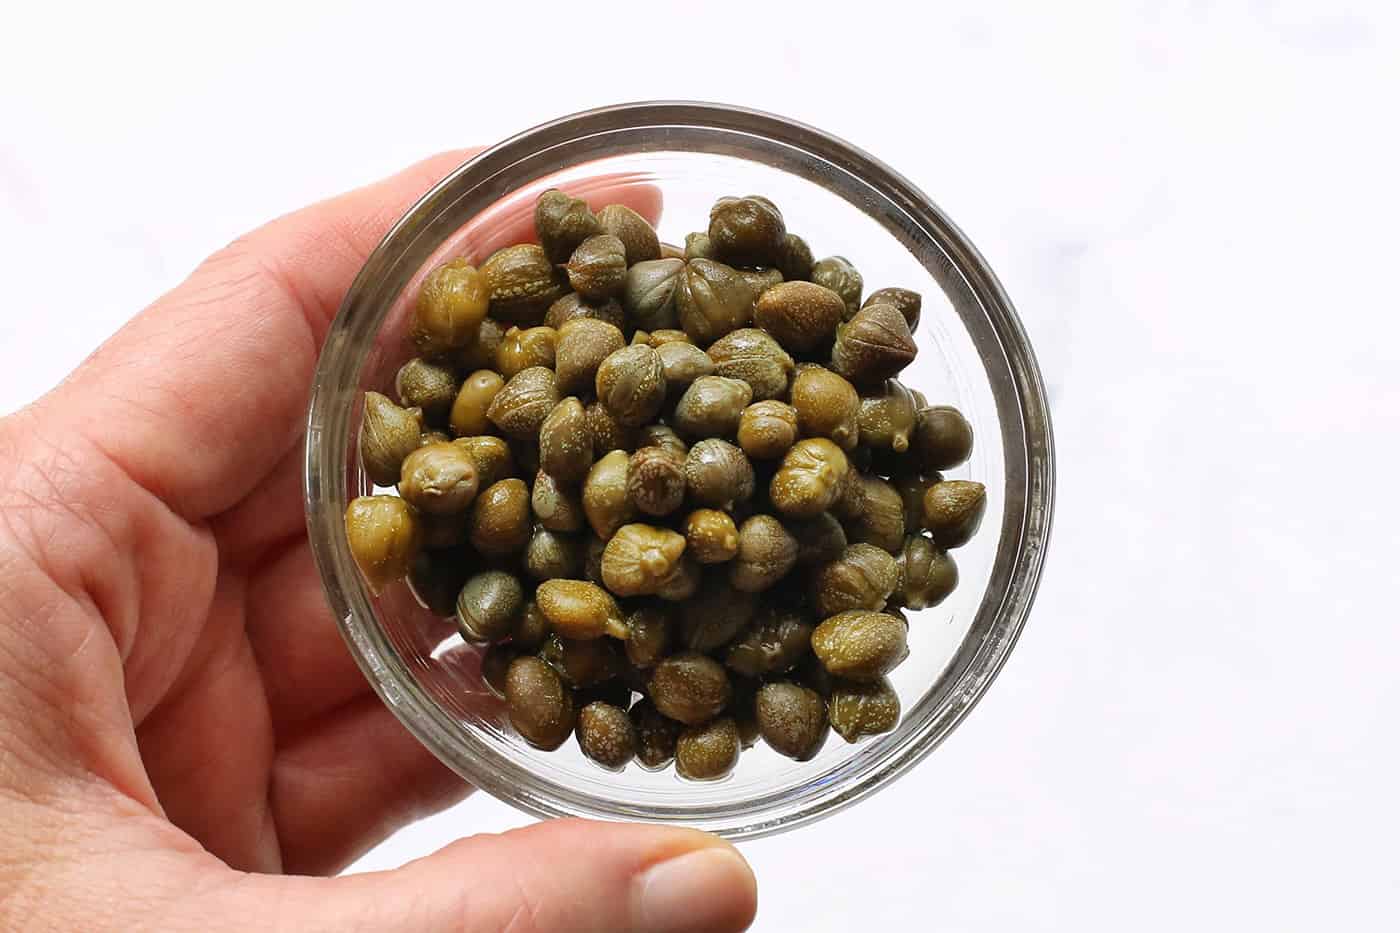 A hand holding a dish of capers